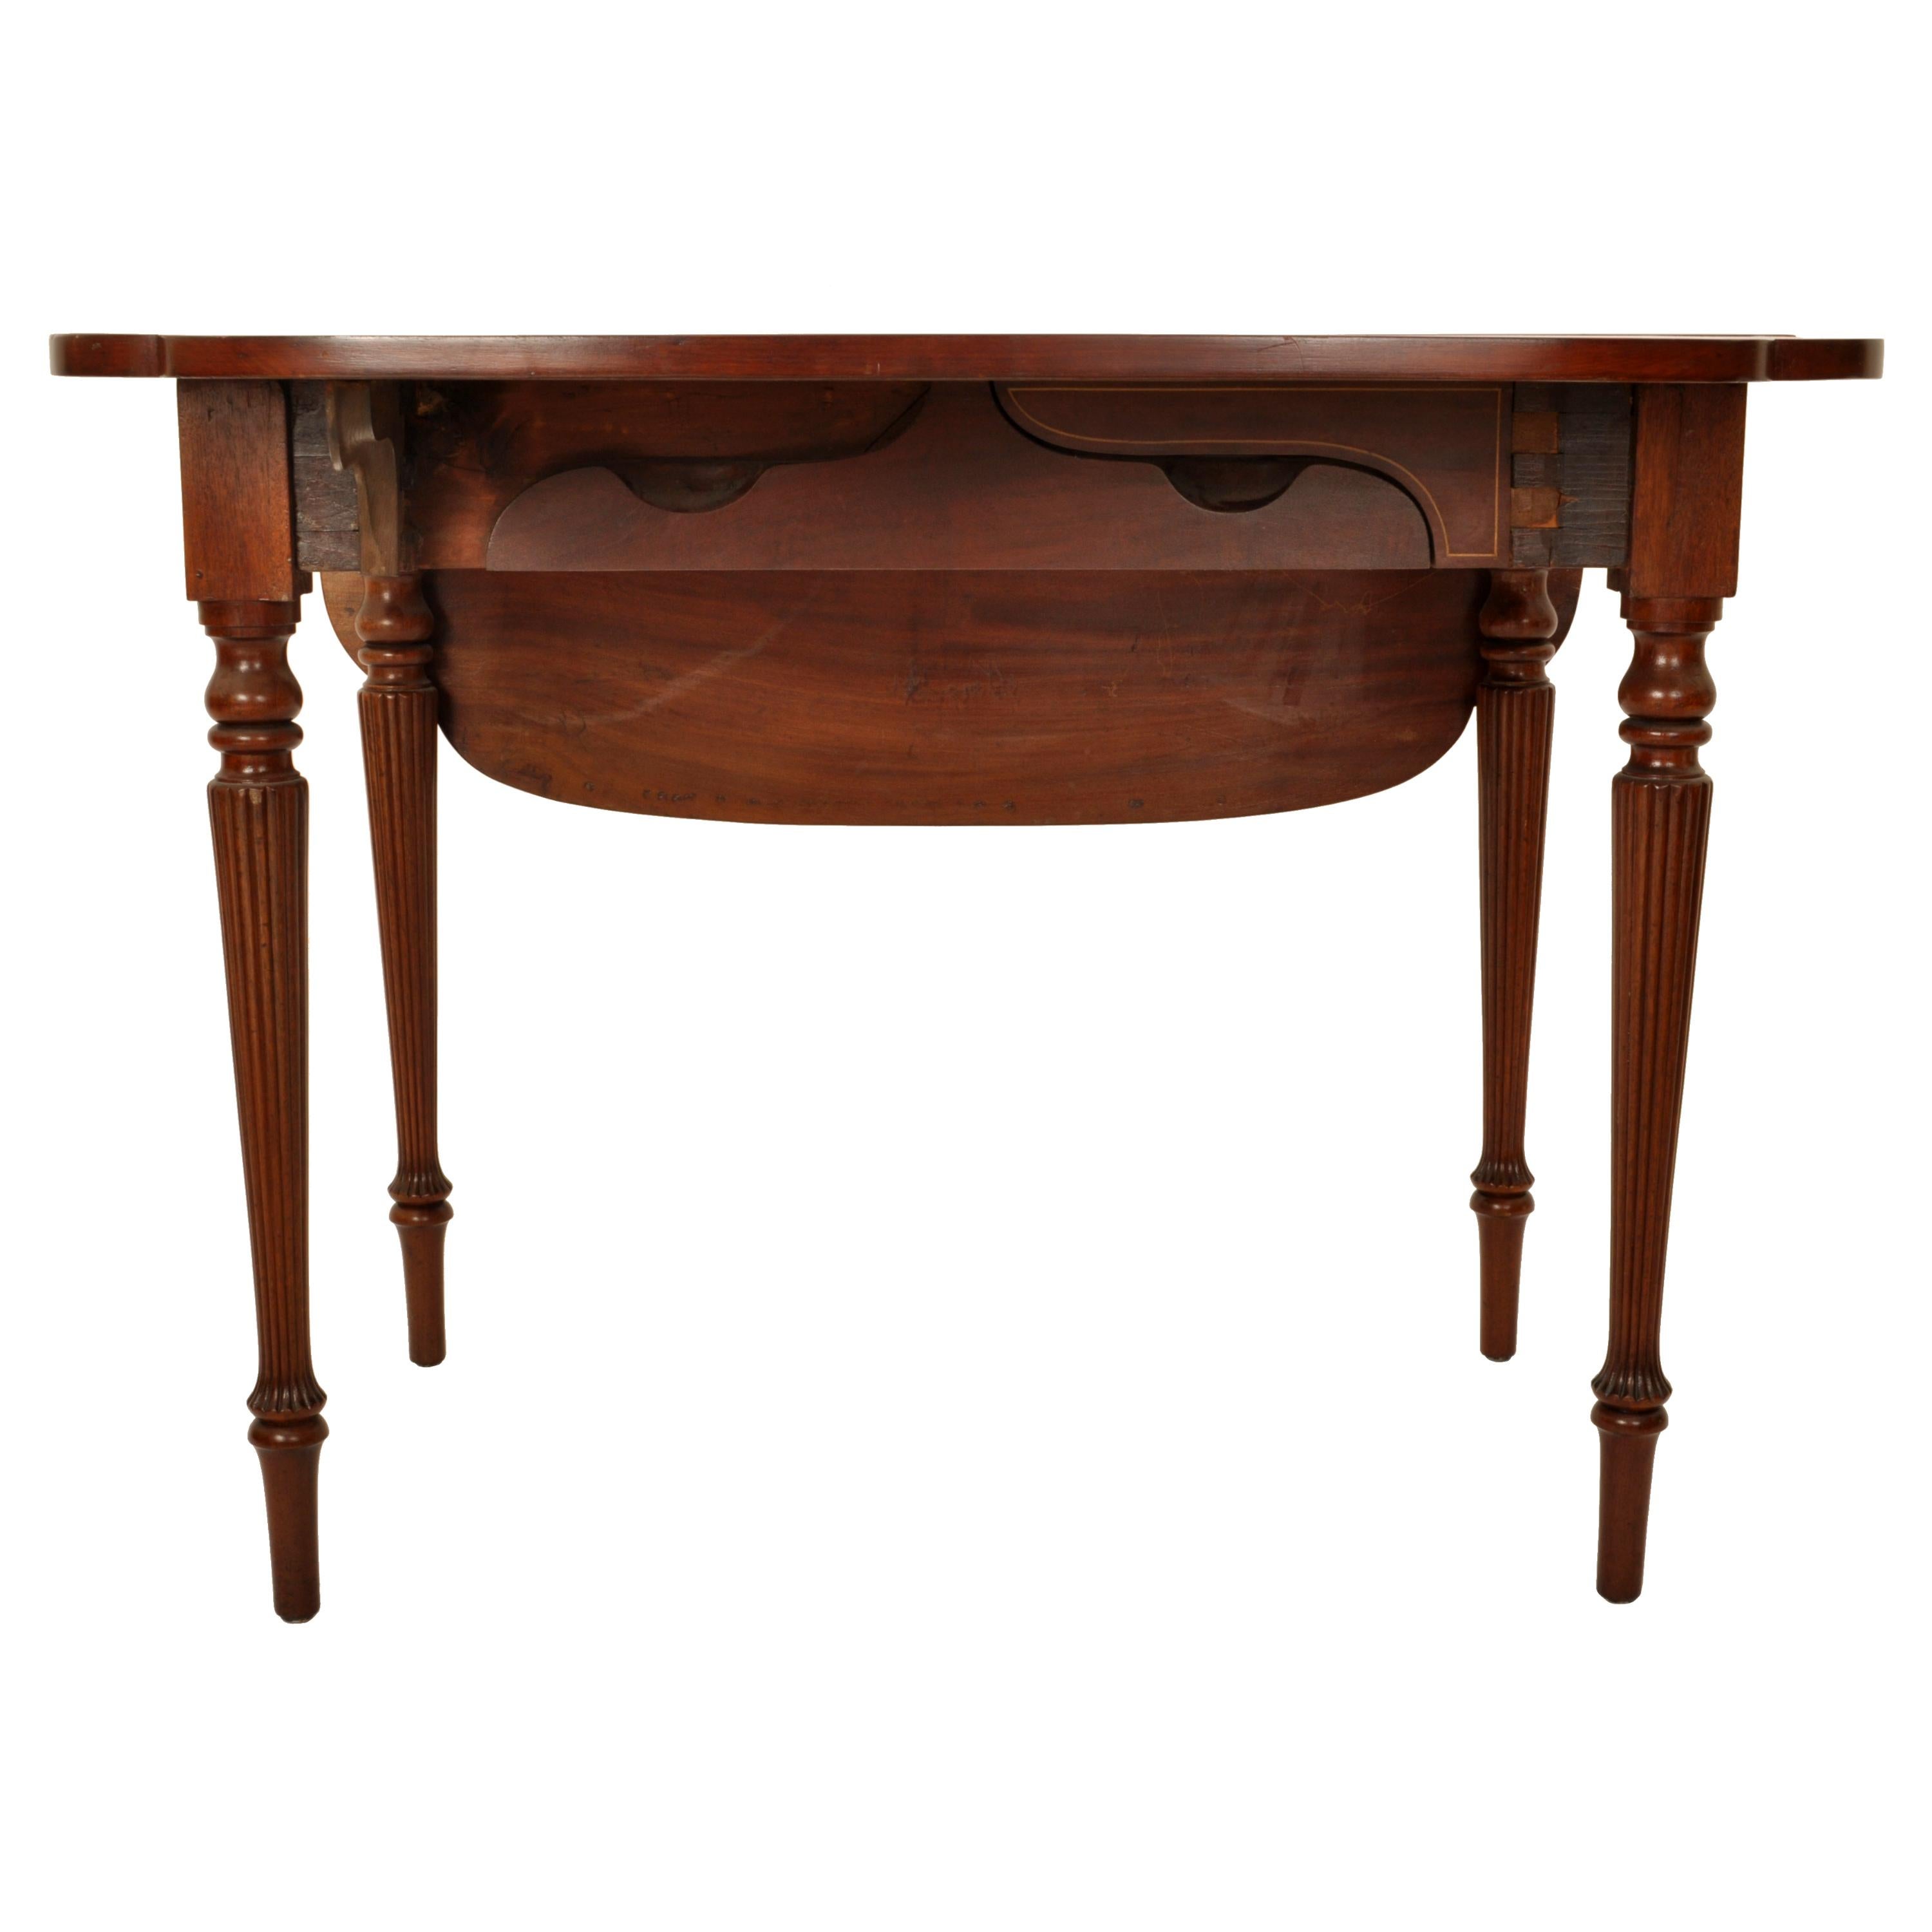 Antique American Federal Sheraton Inlaid Mahogany Pembroke Table New York 1790 For Sale 10